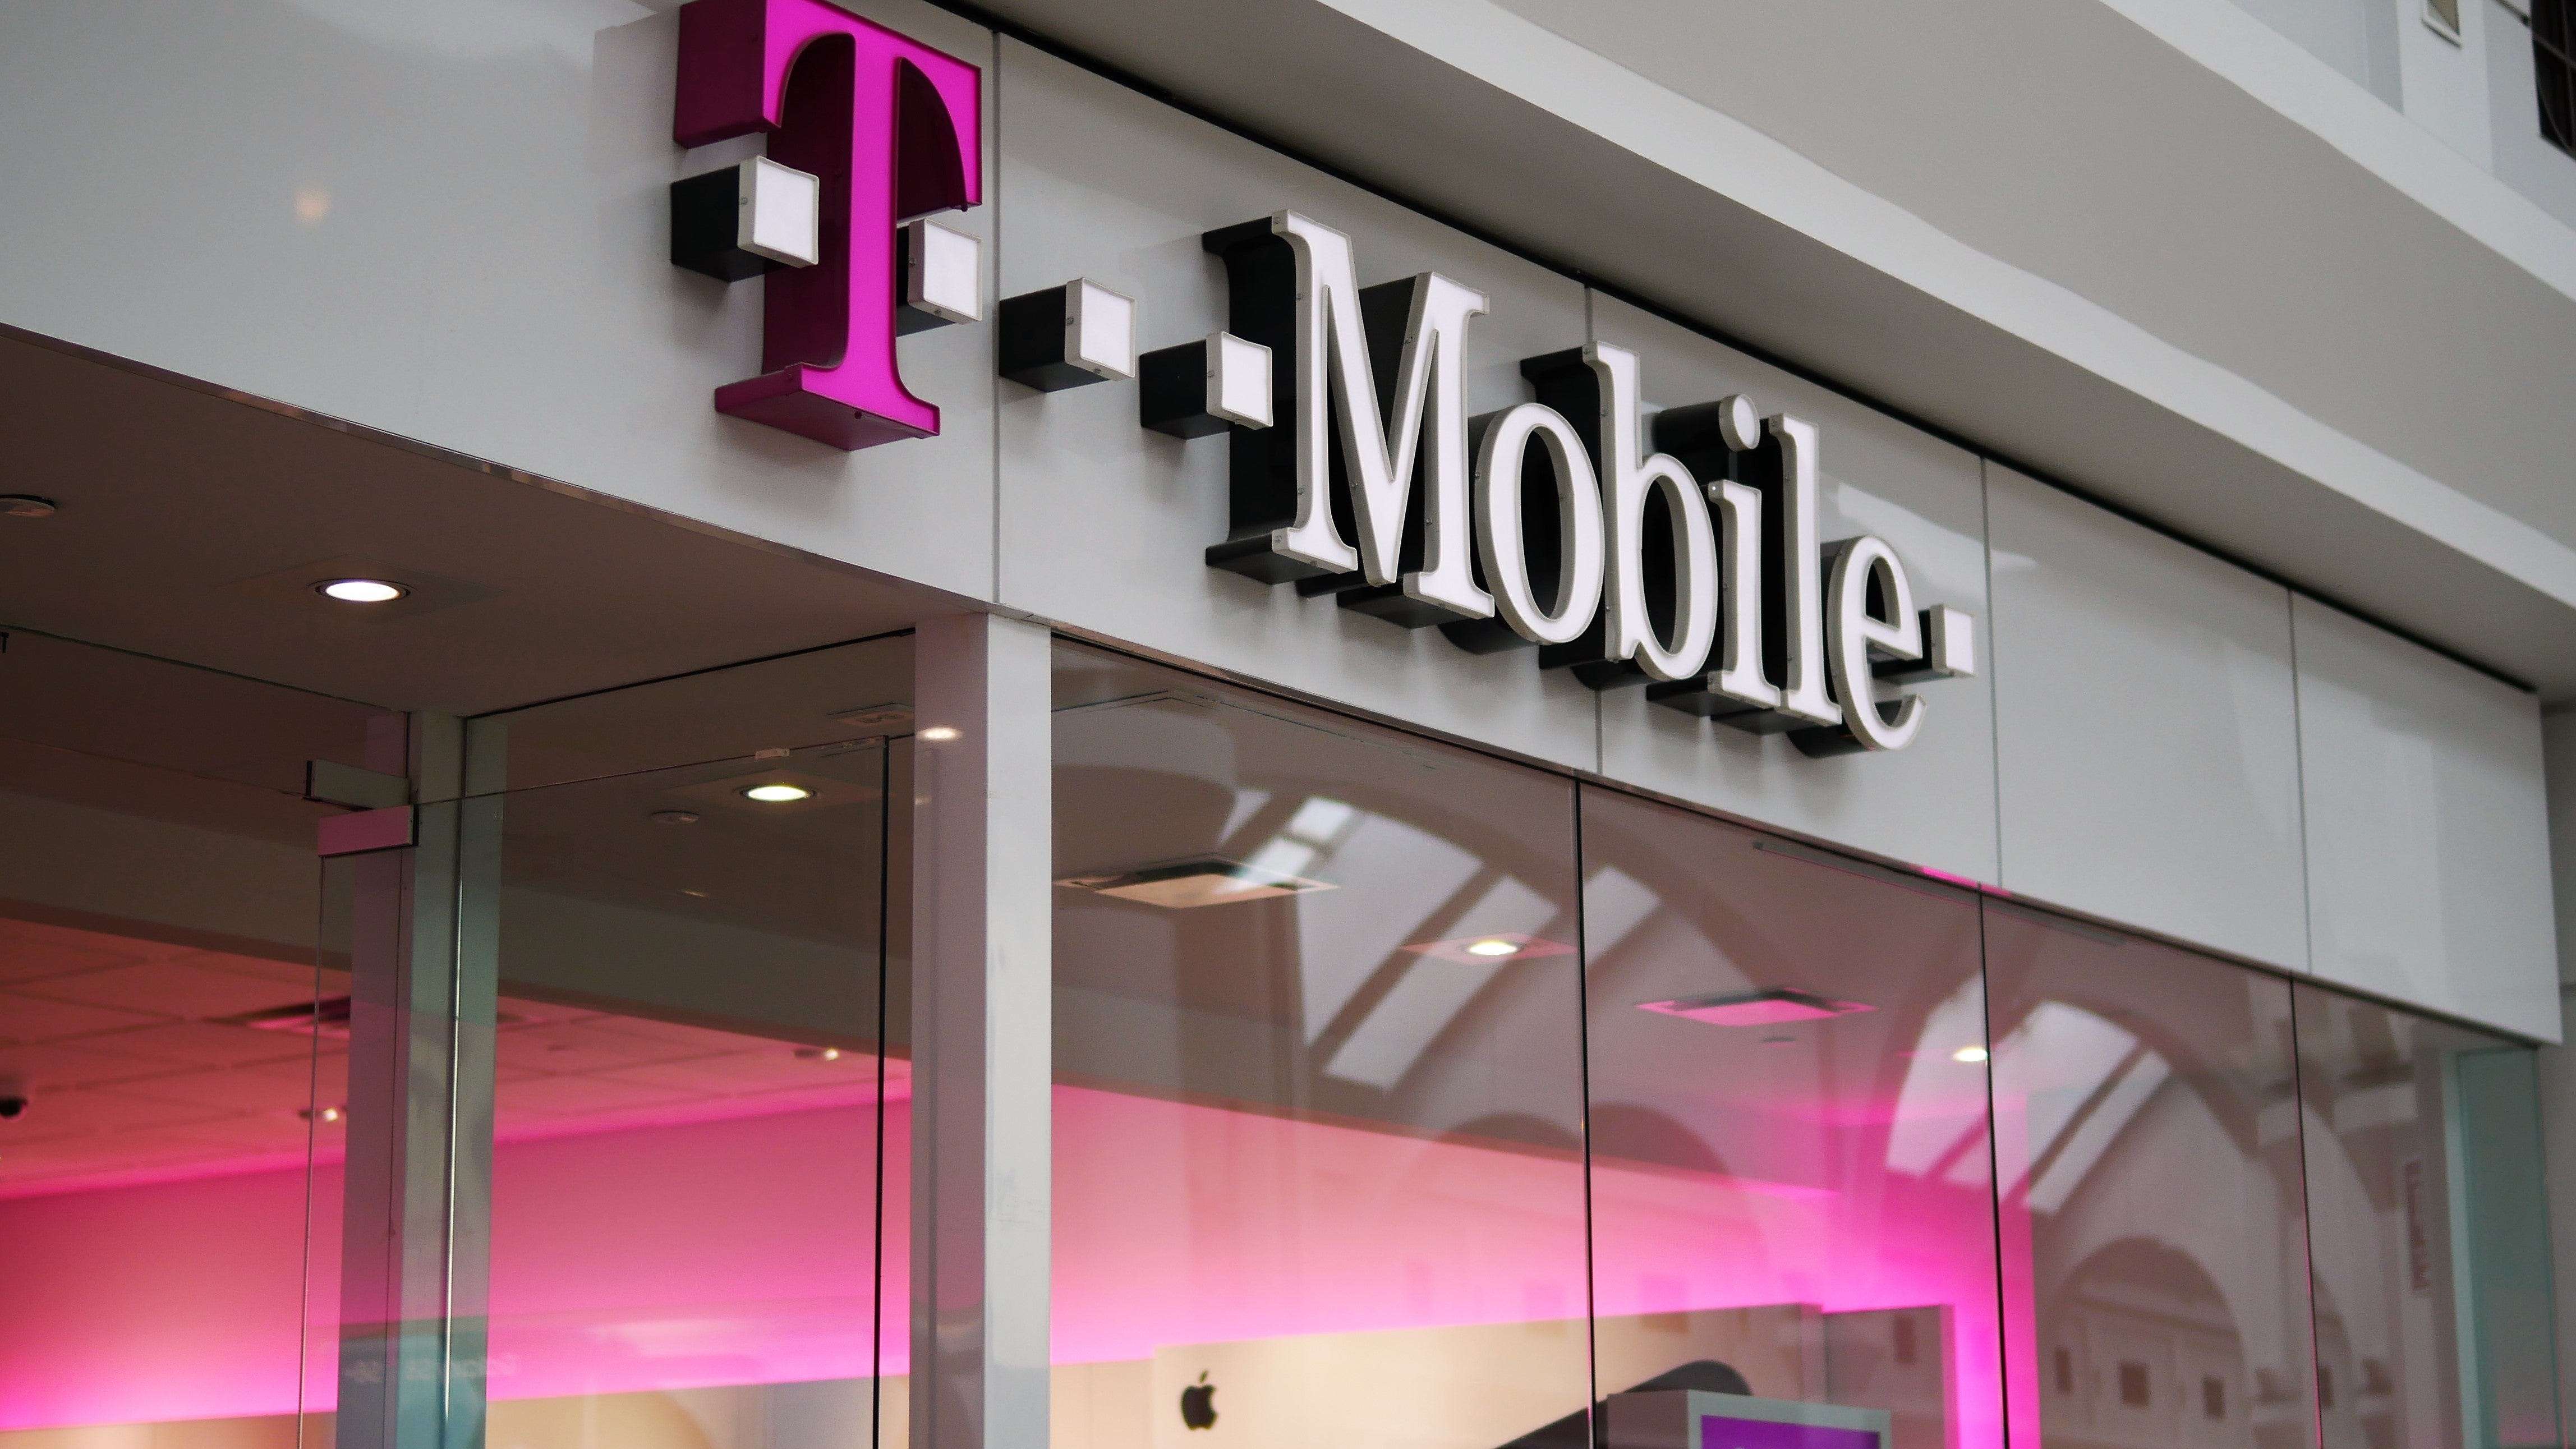 t mobile telephone number